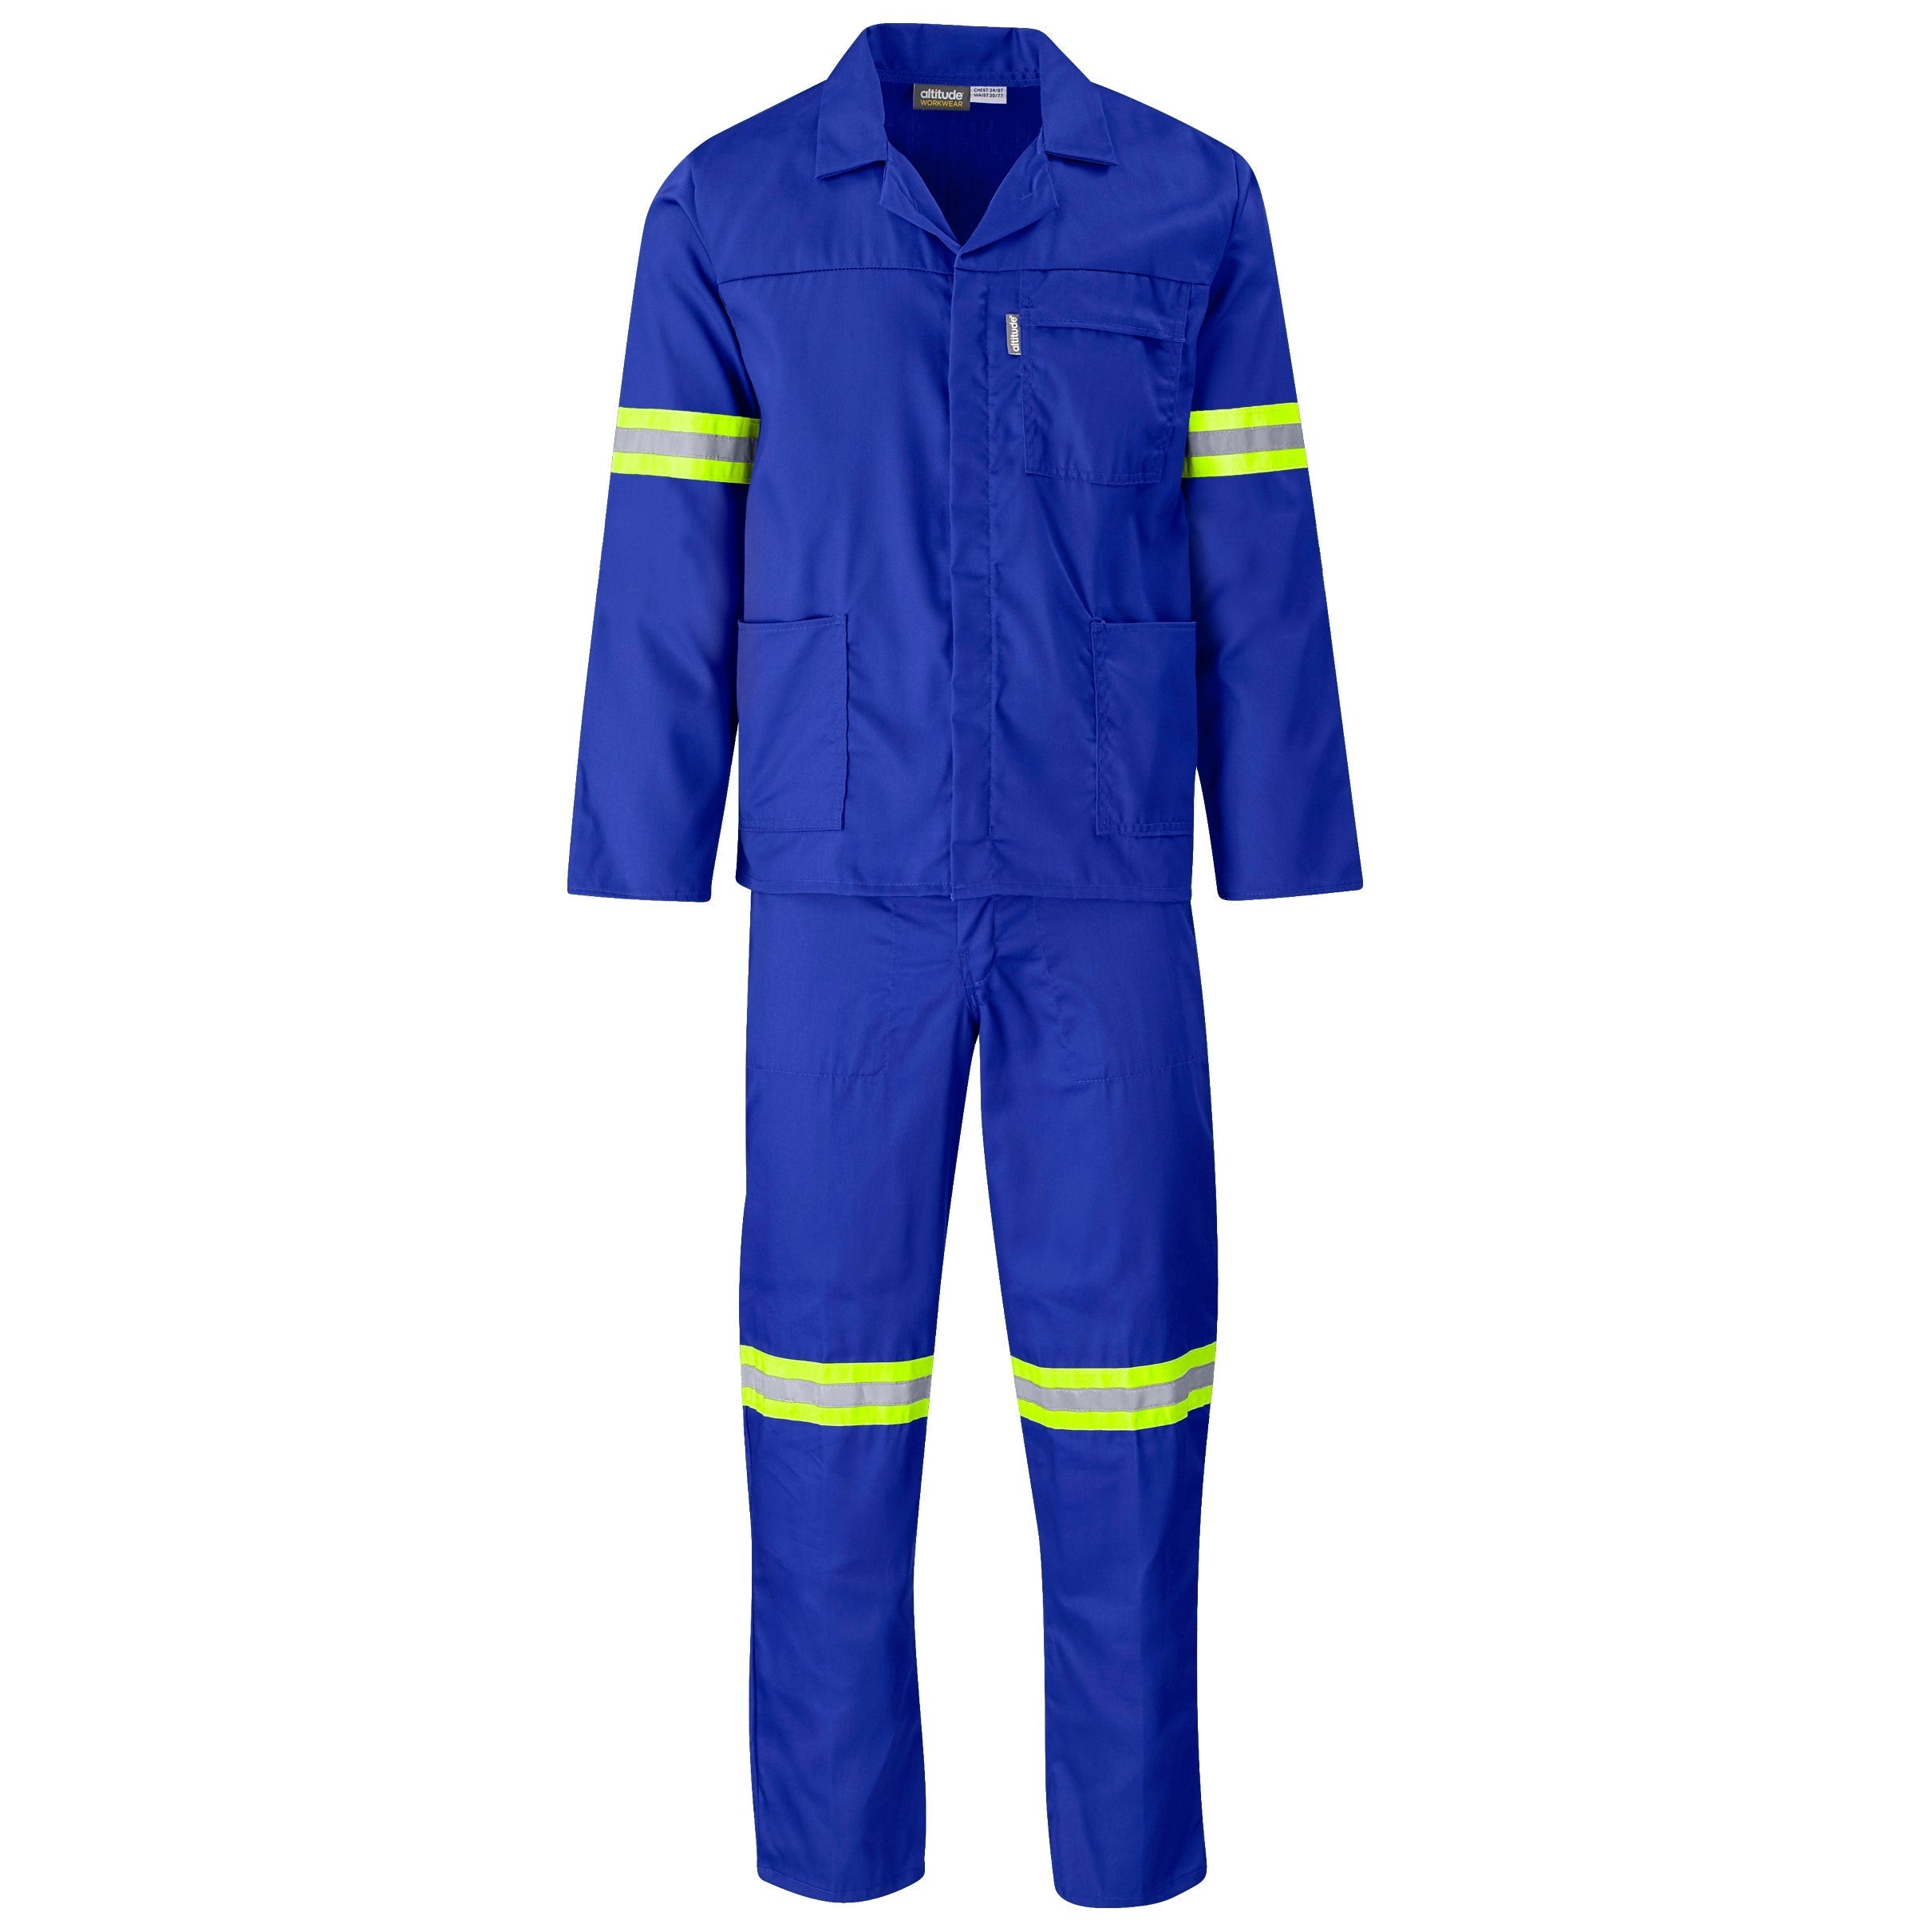 Trade Polycotton Conti Suit - Reflective Arms & Legs - Yellow Tape-32-Royal Blue-RB